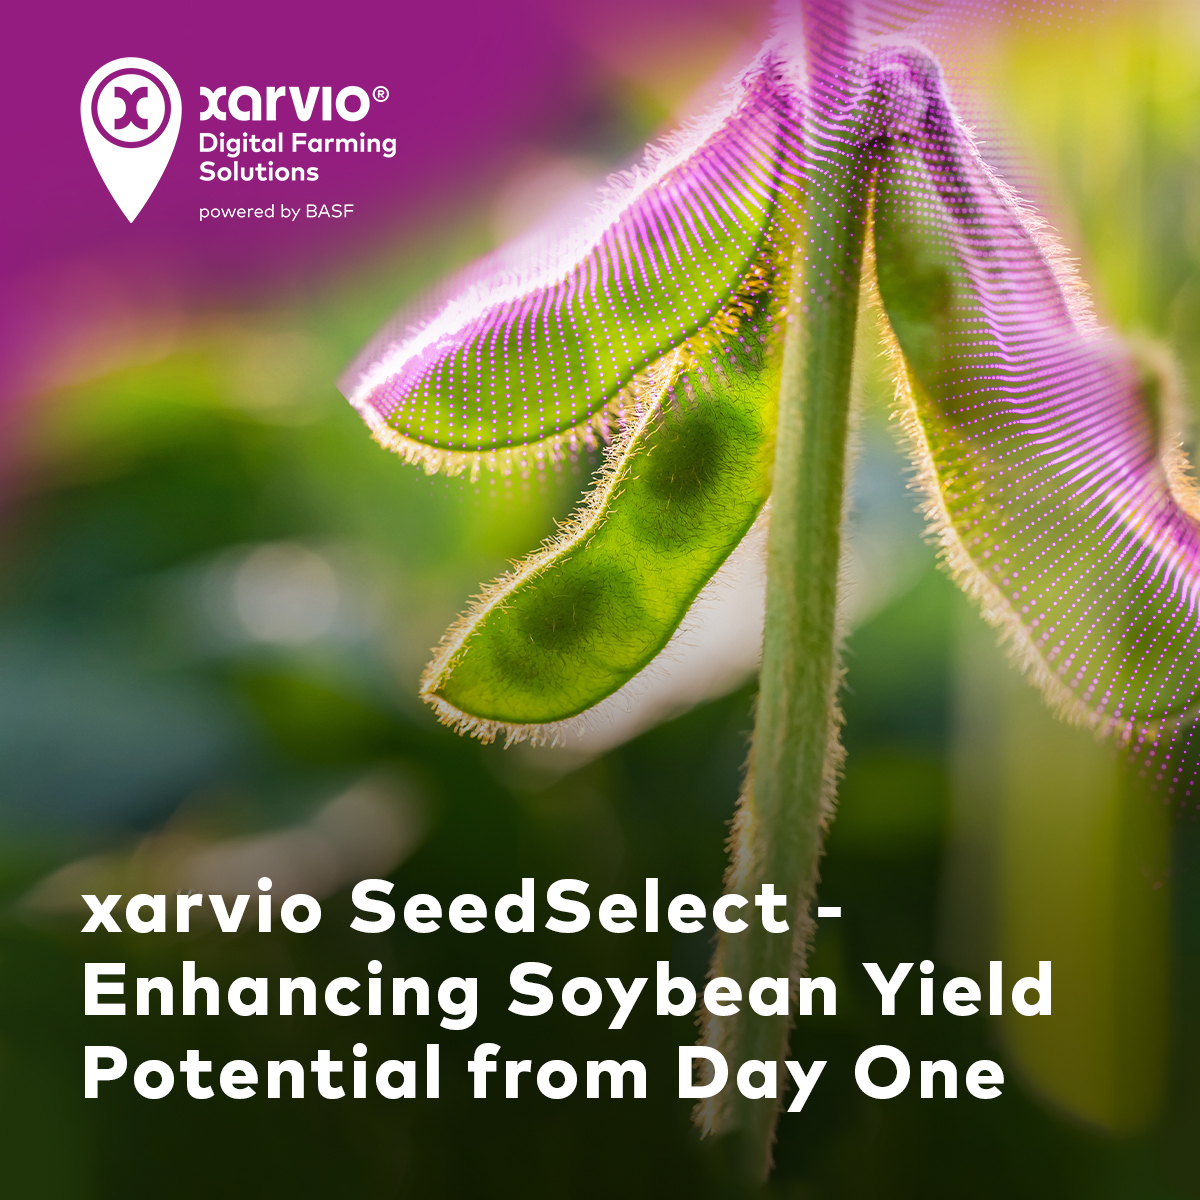 Maximize soybean yields by tailoring variety selection to your field's unique characteristics. SeedSelect, available exclusively in the US, ensures optimal product placement and performance for successful soybean cultivation.

#xarvio #digitalfarming #precisionag